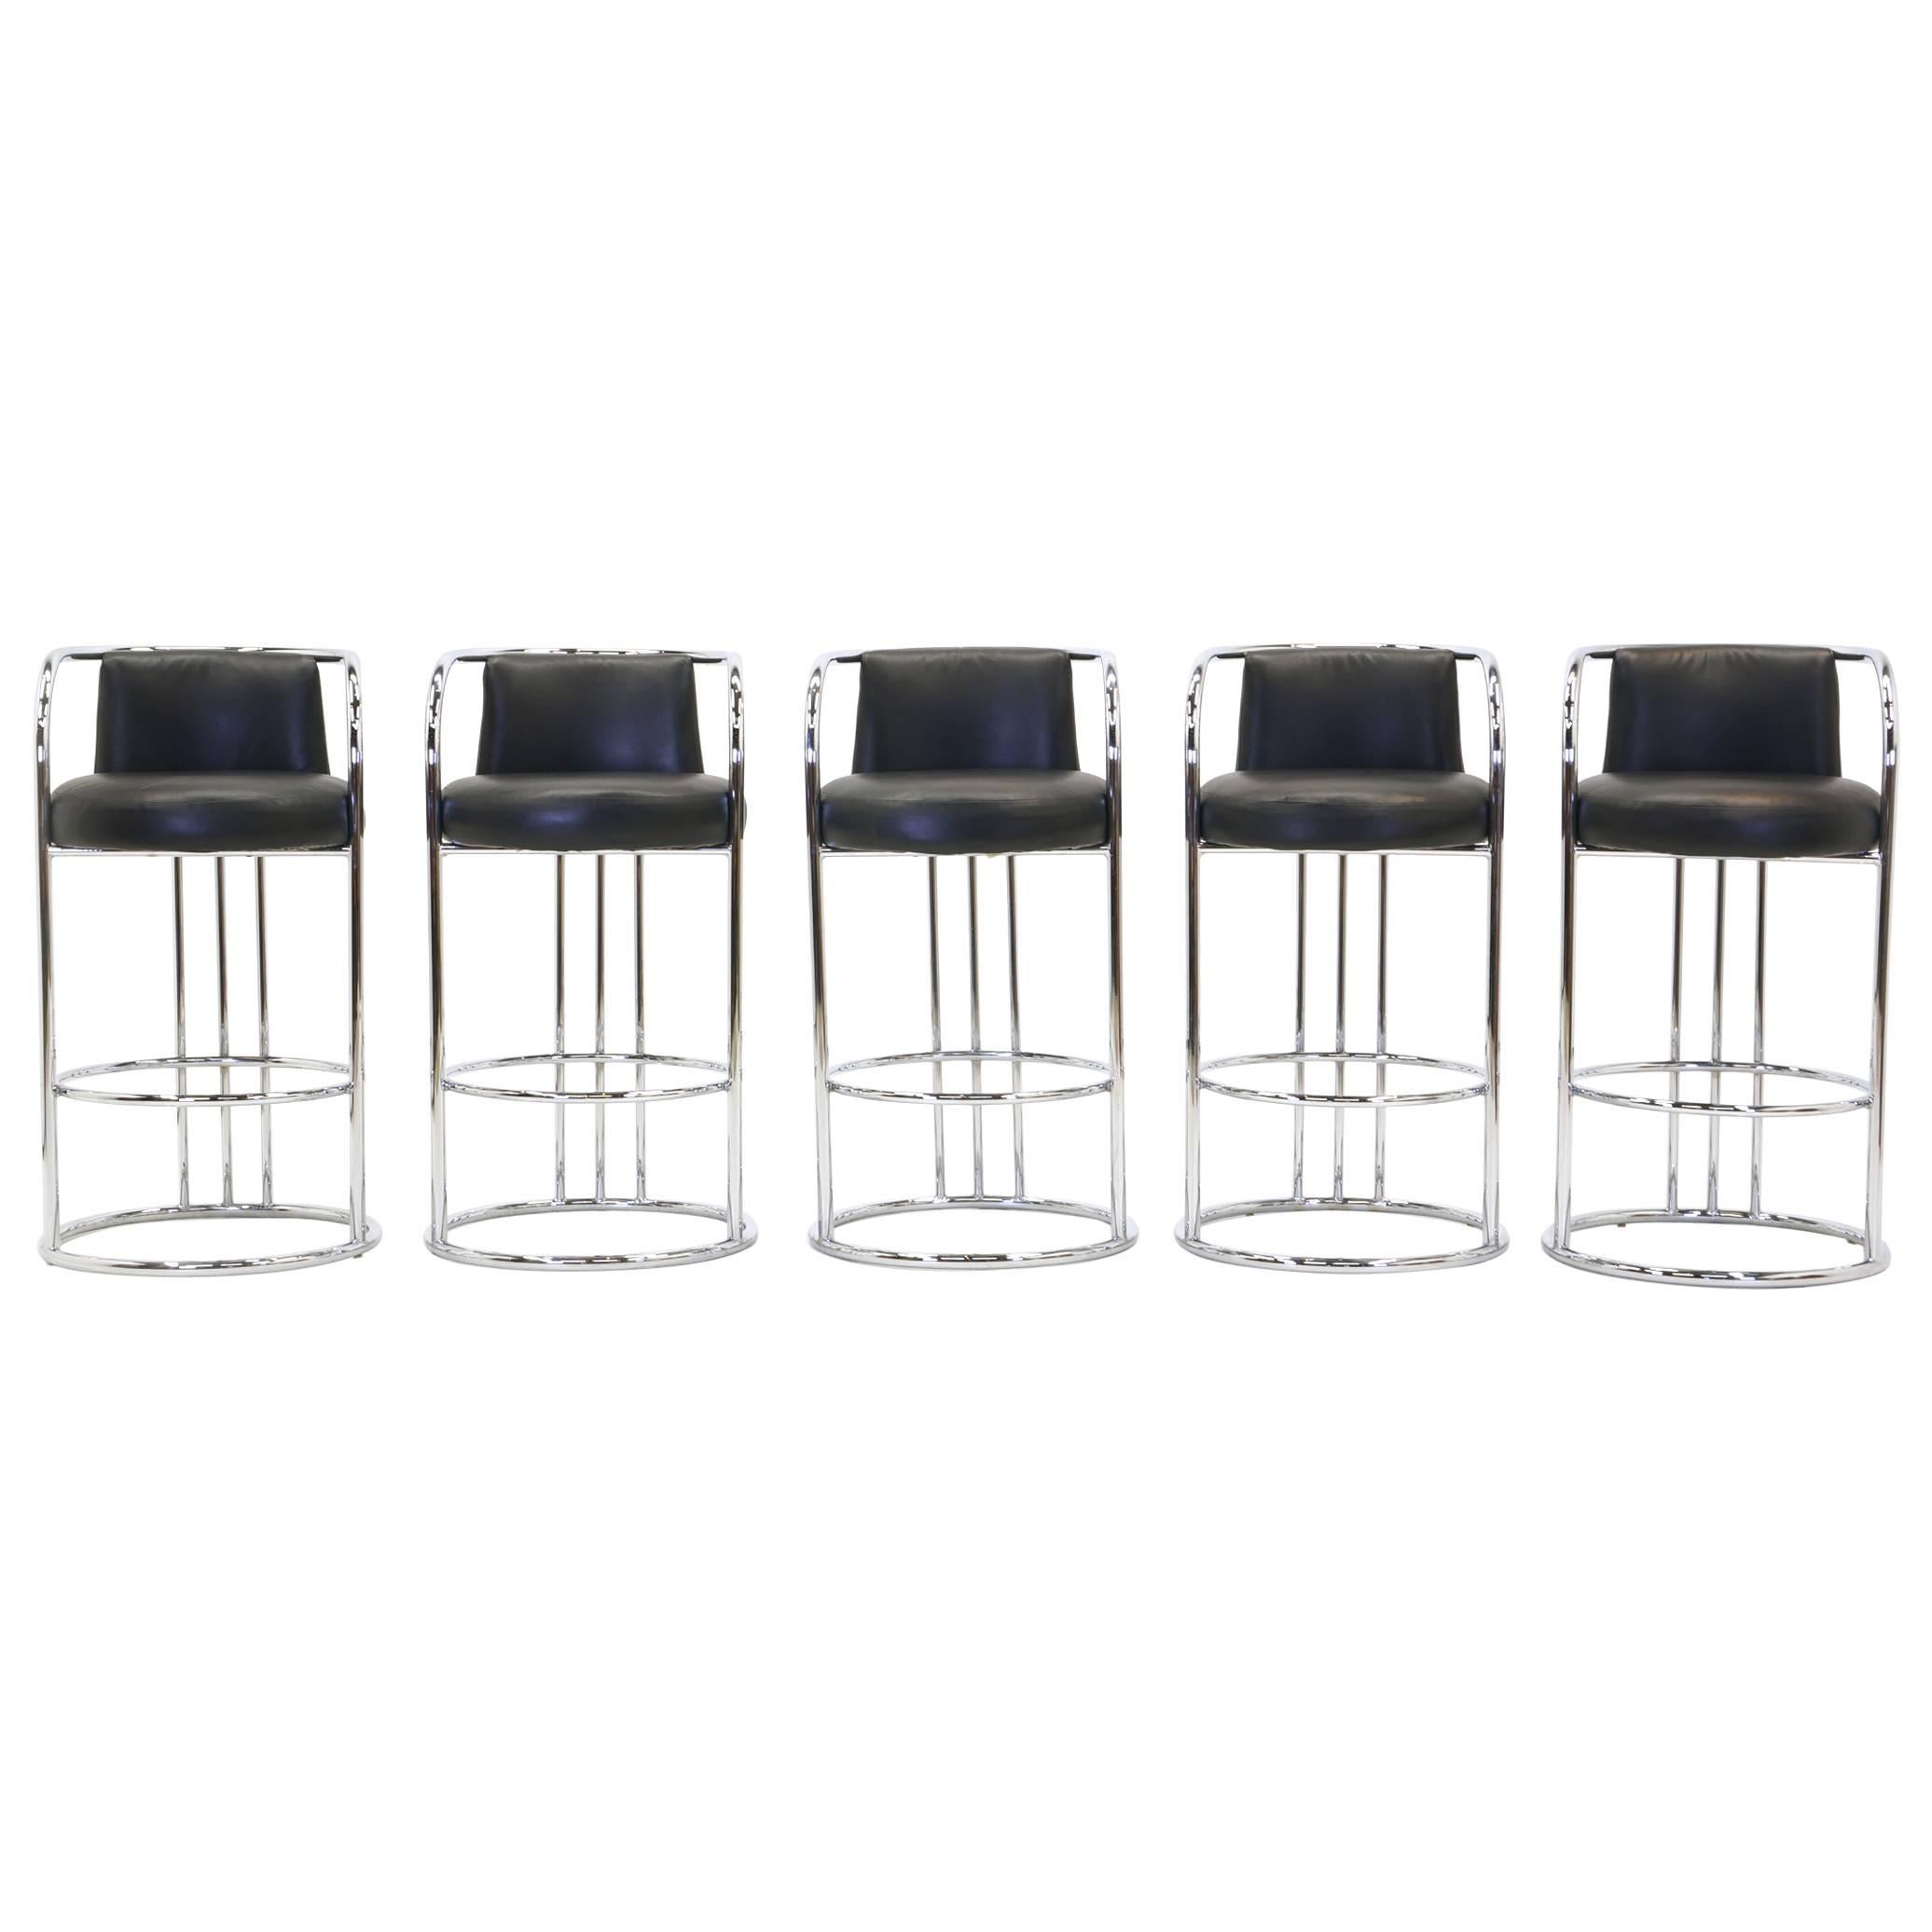 Milo Baughman for Thayer Coggin Chrome and Black Bar Stools, Five Total, Signed